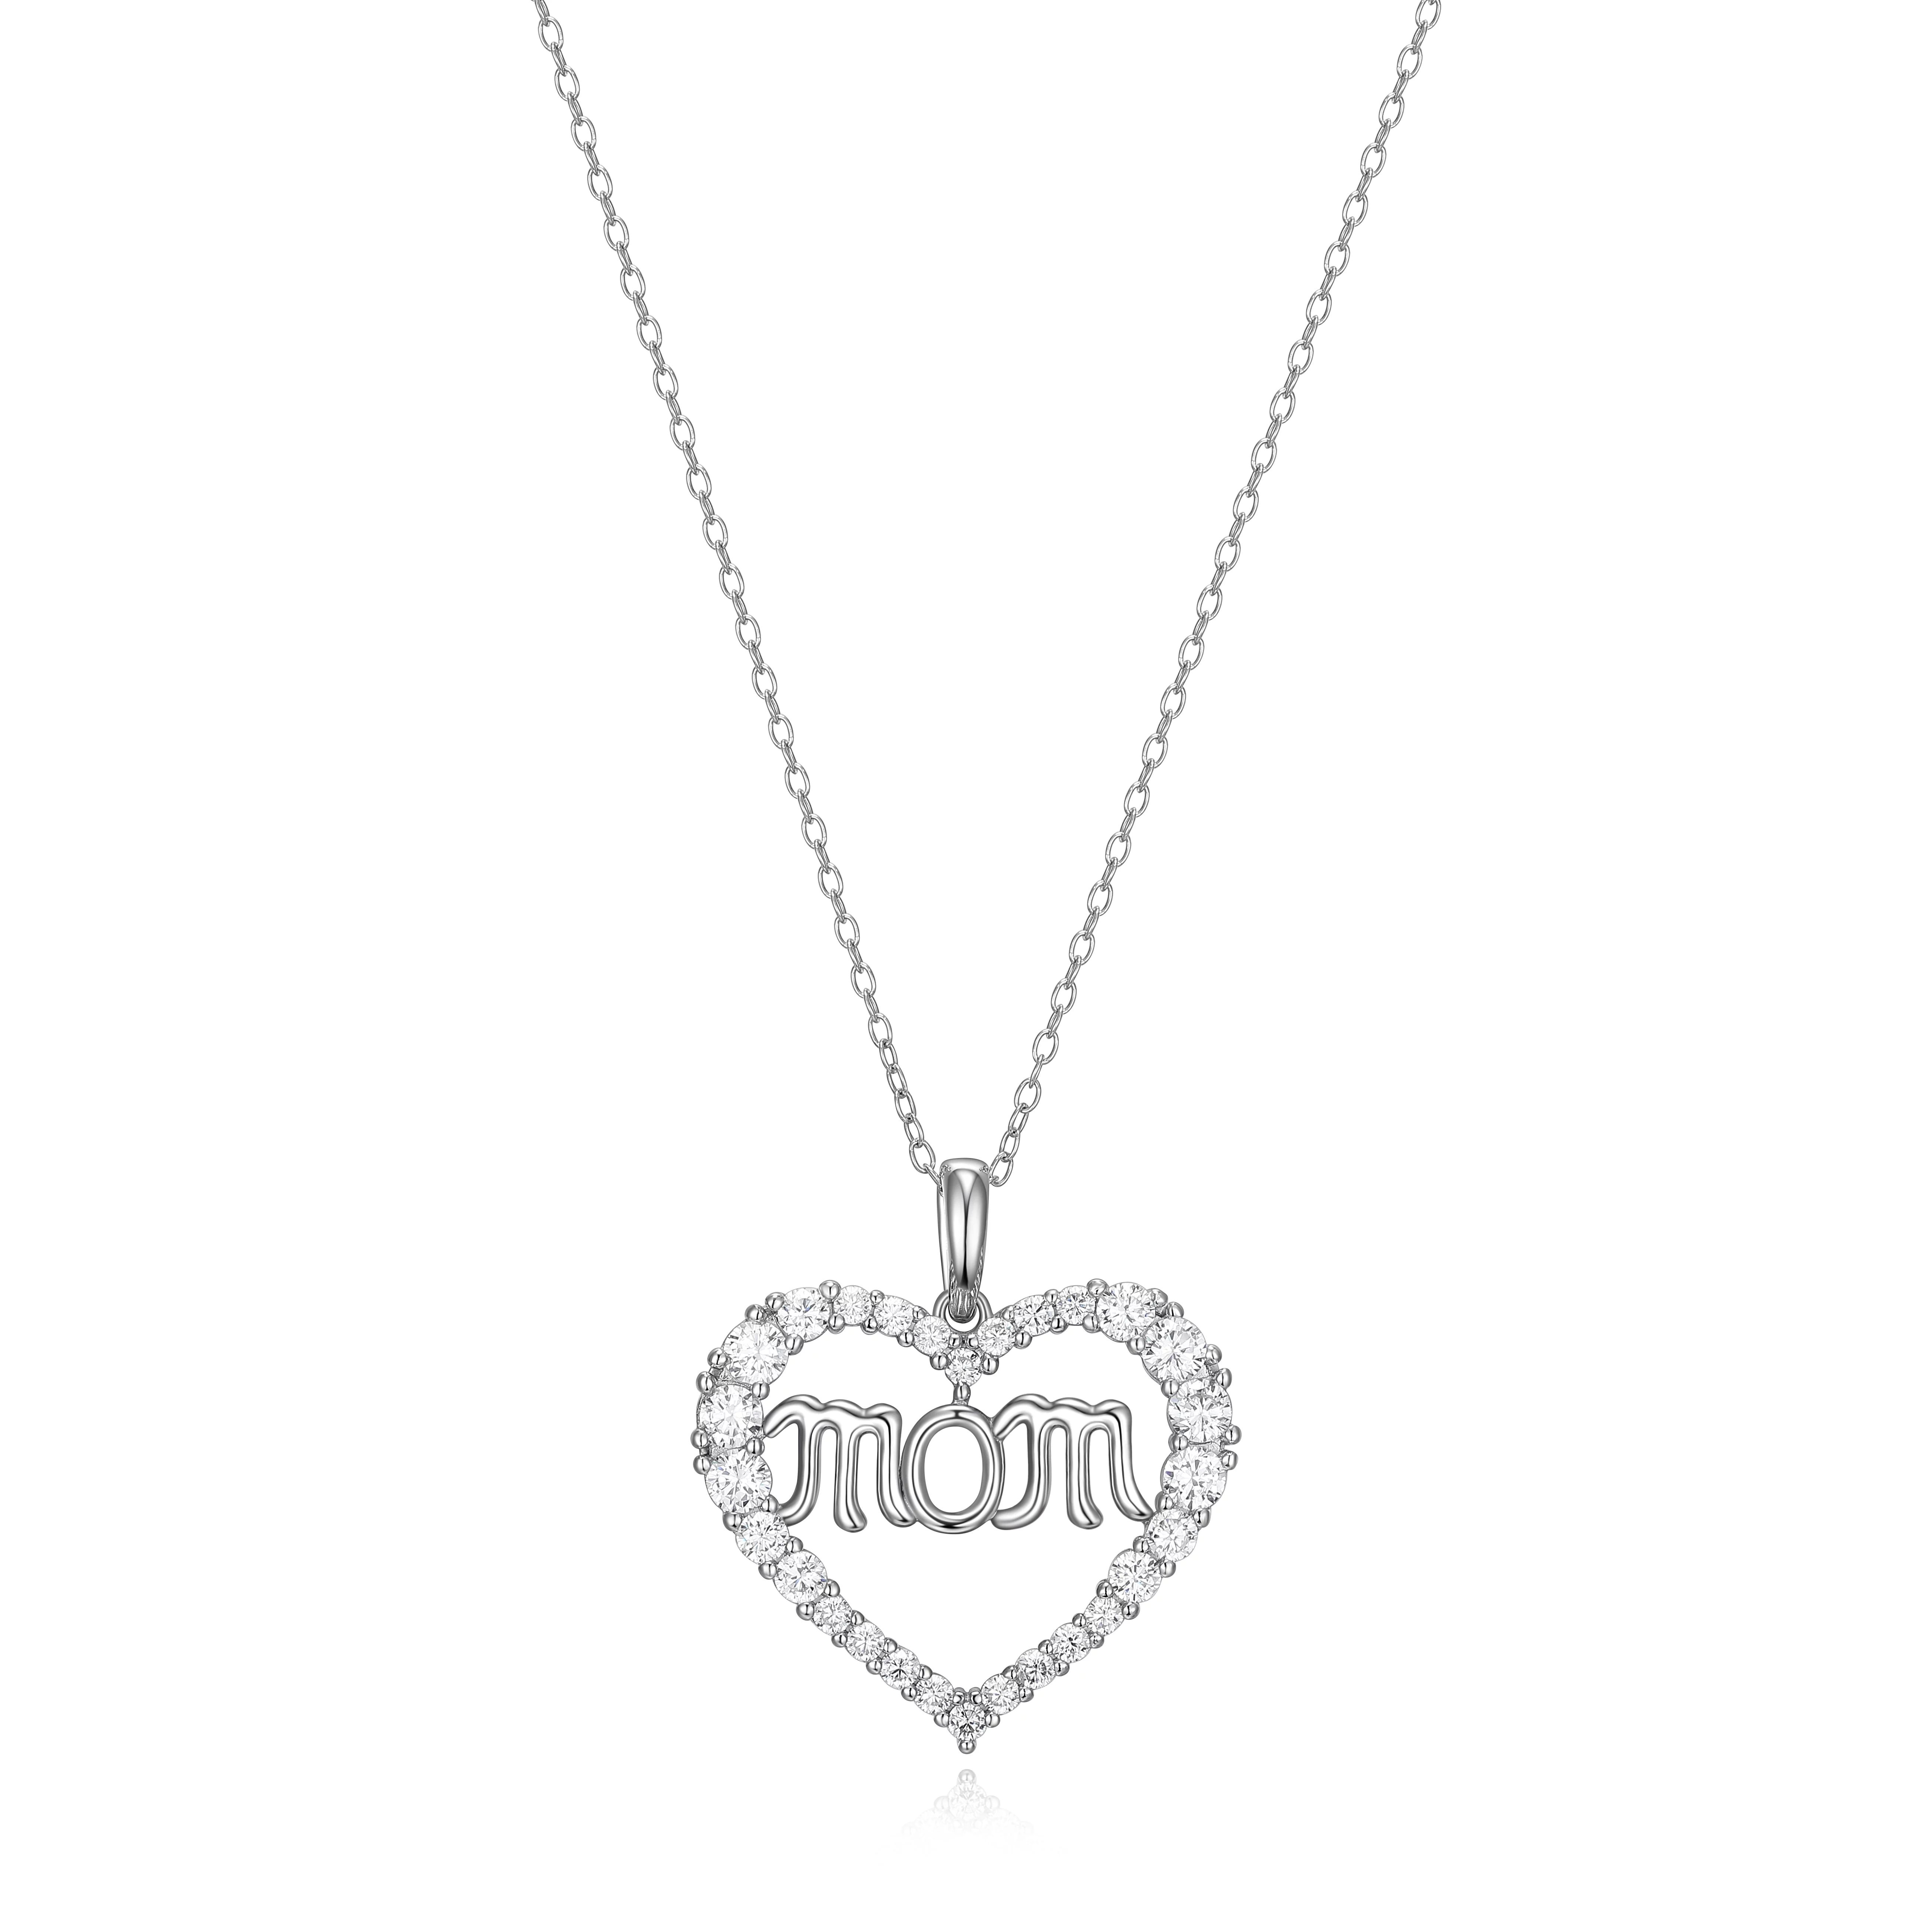 Forever Facets Women's 925 Sterling Silver Cubic Zirconia Open Heart "mom" Pendant Necklace with ... | Walmart (US)